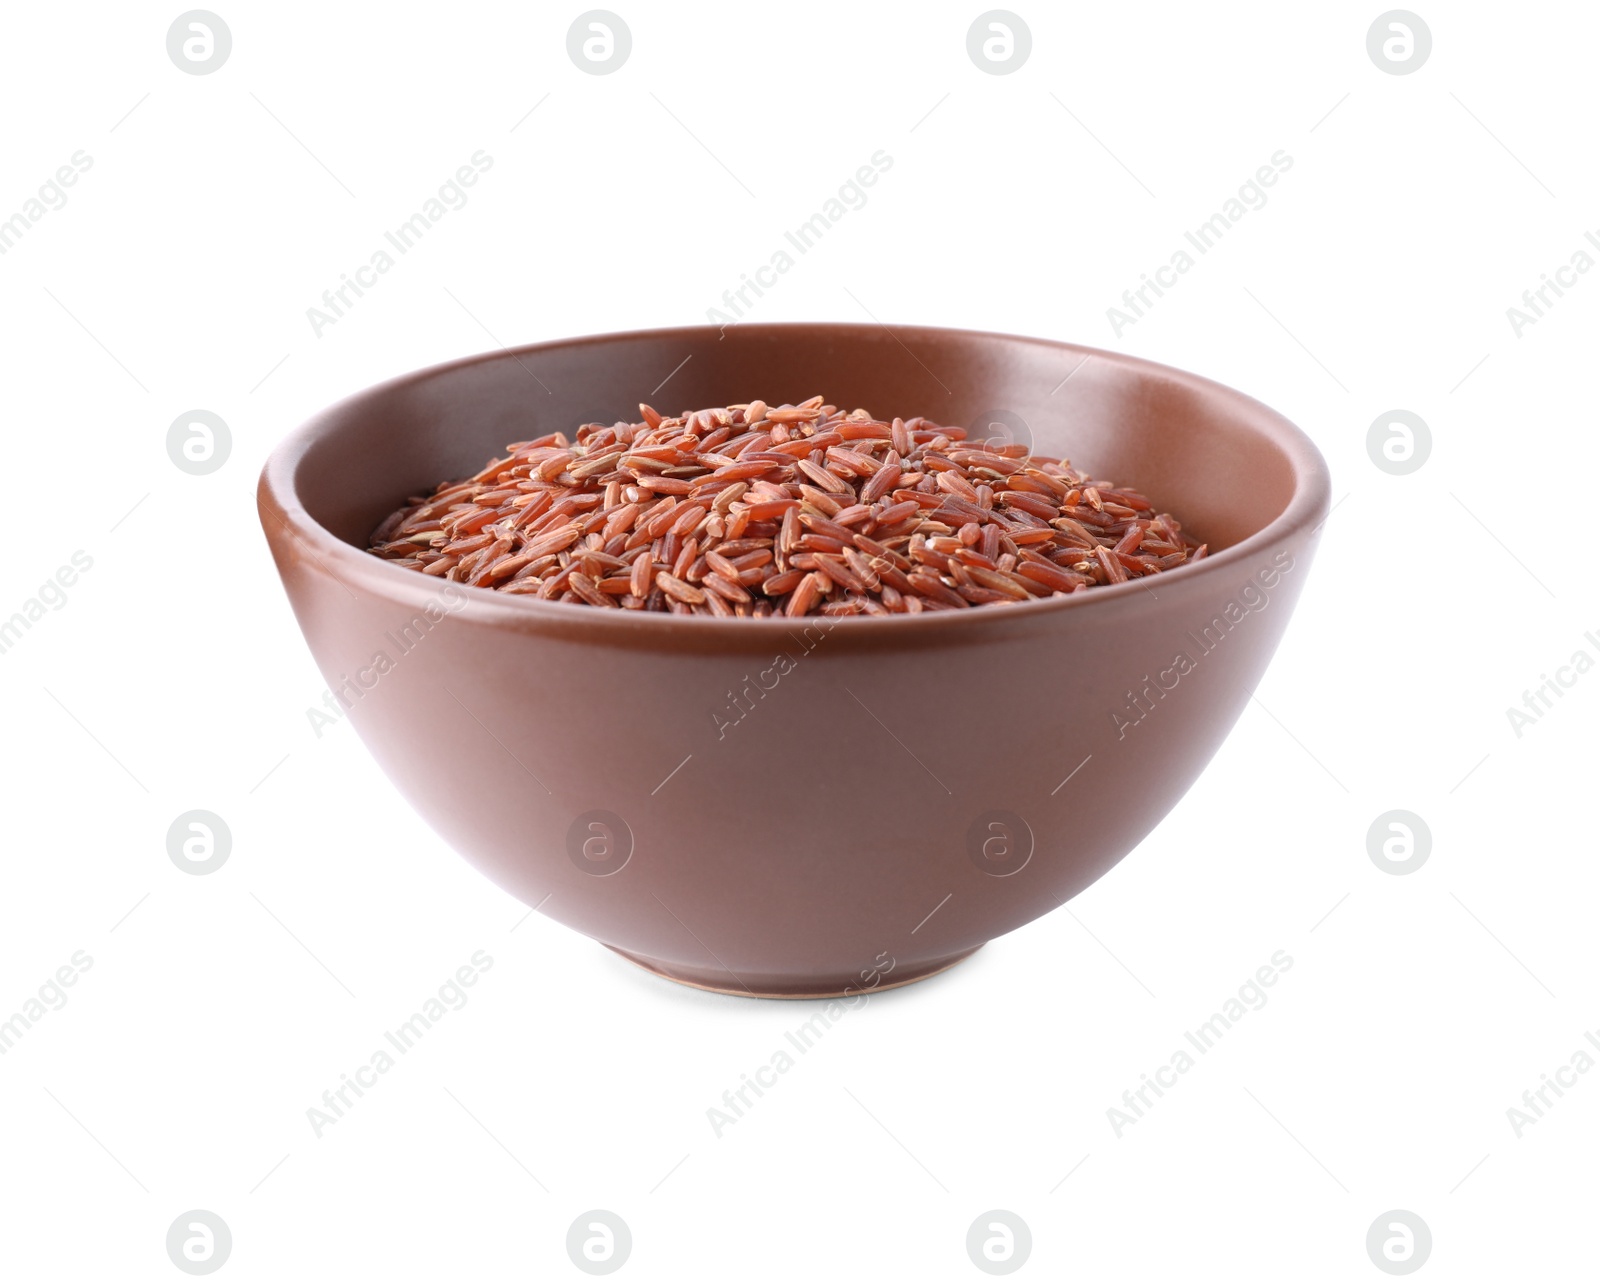 Photo of Uncooked brown rice in bowl isolated on white